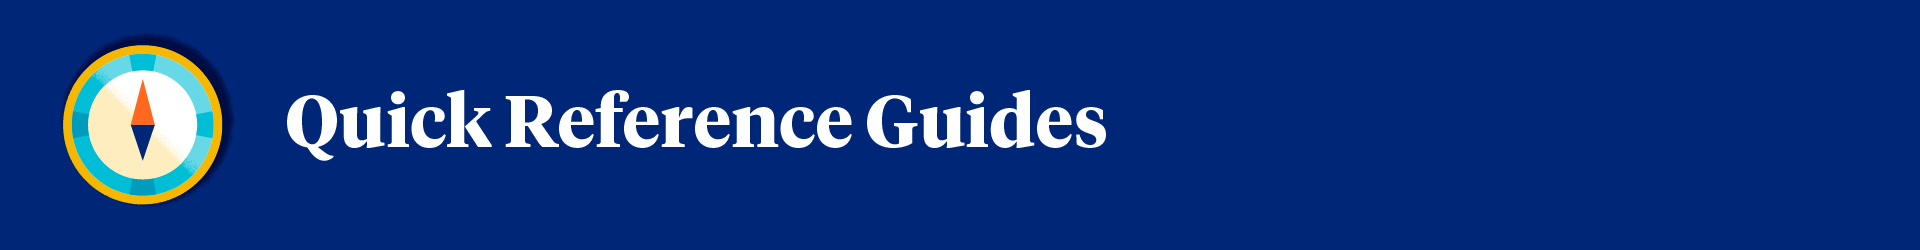 Quick Reference Guides Logo